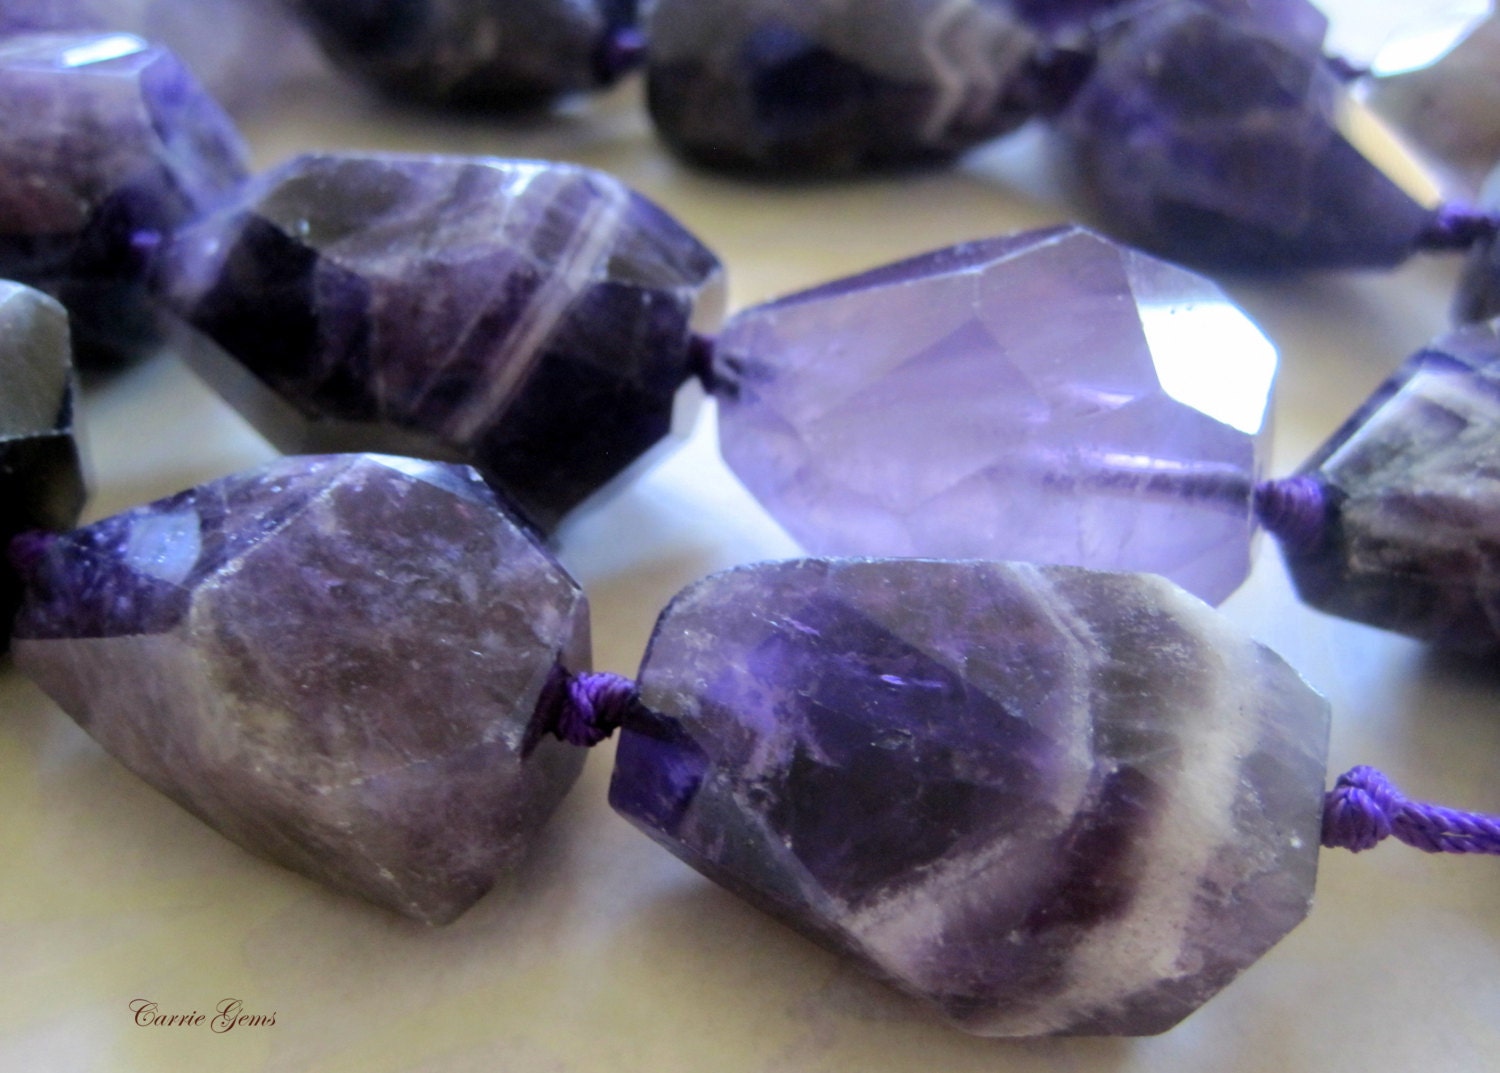 16" long (10 pcs) Large Amethyst Graduate Faceted Nugget Beads - carriegems